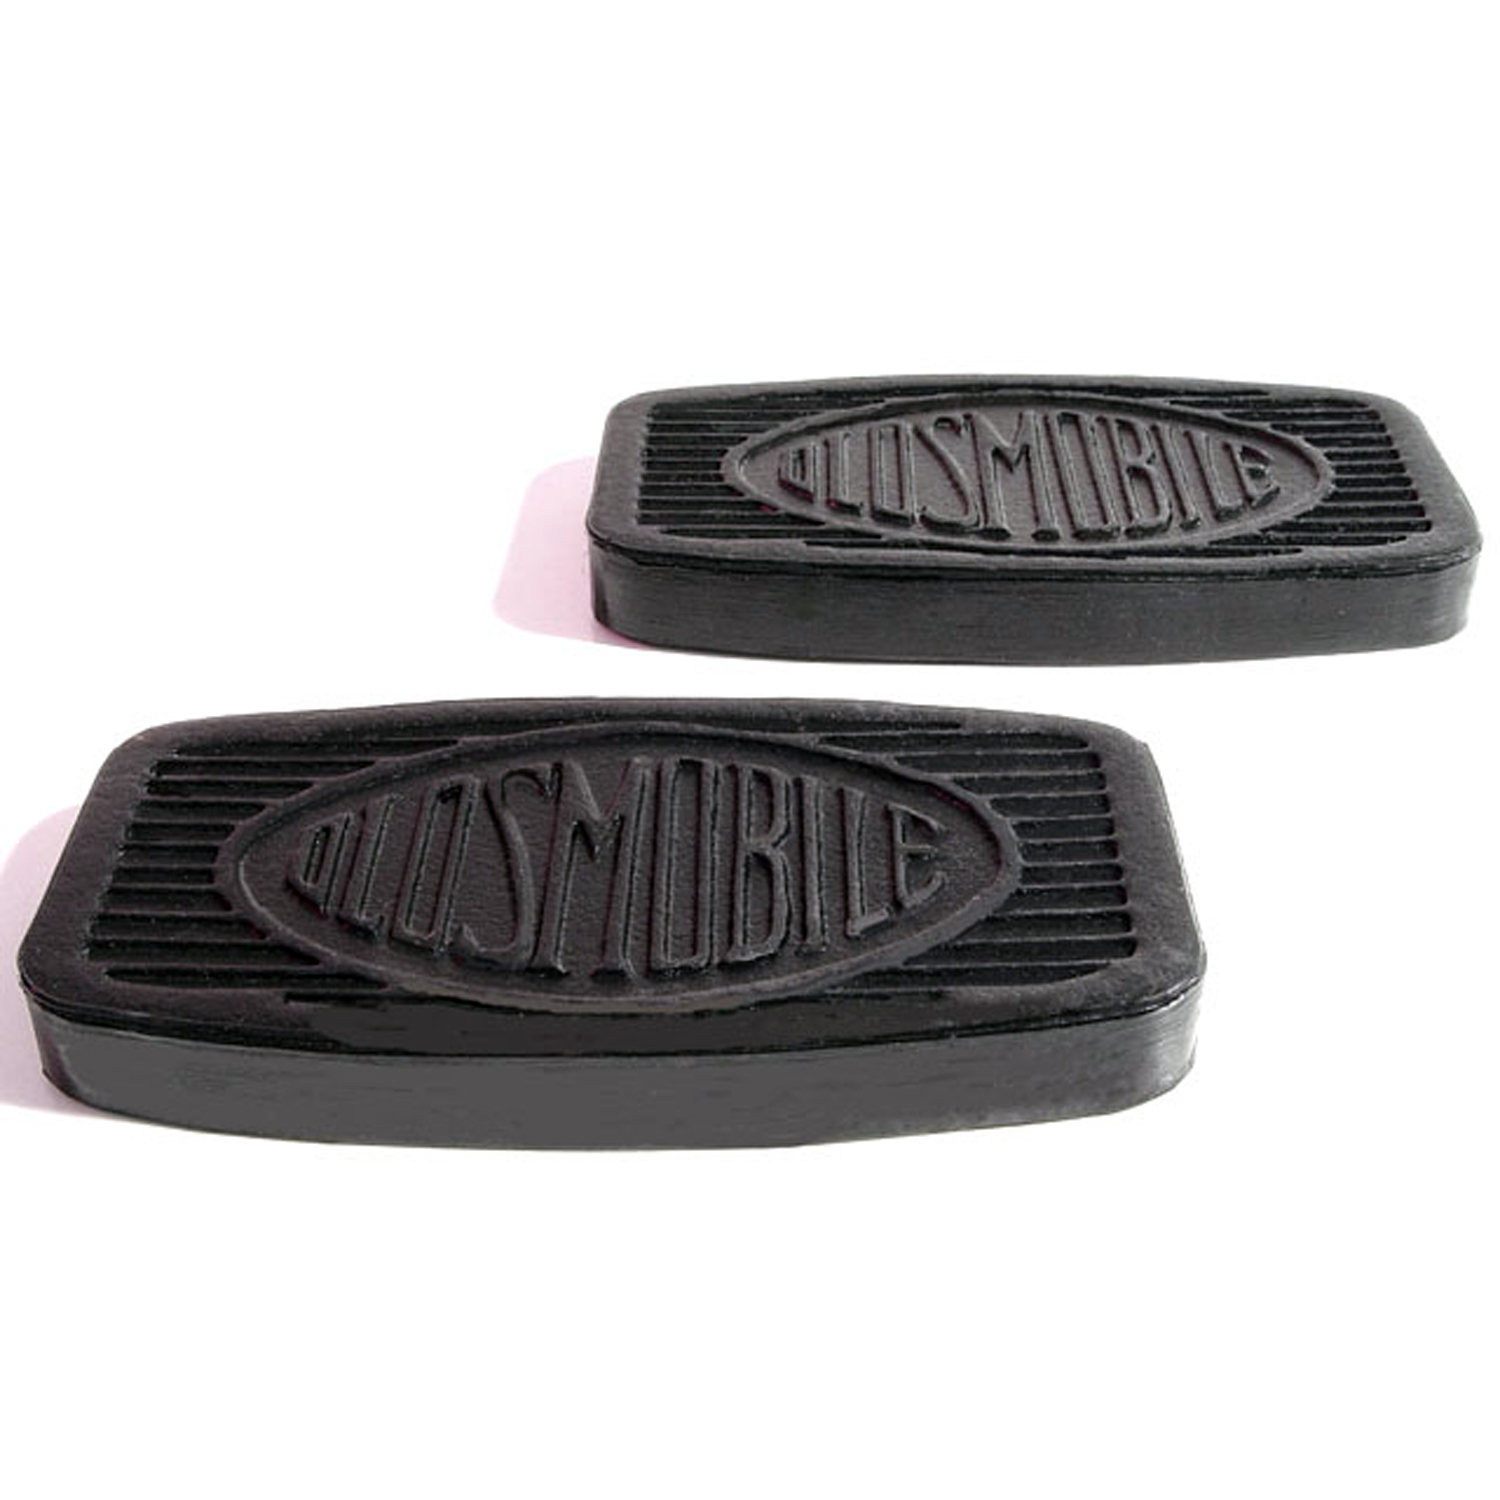 1932 Oldsmobile Model L-32 Clutch and Brake Pedal Pads.  3-1/2 wide X 1-3/16 long-CB 95